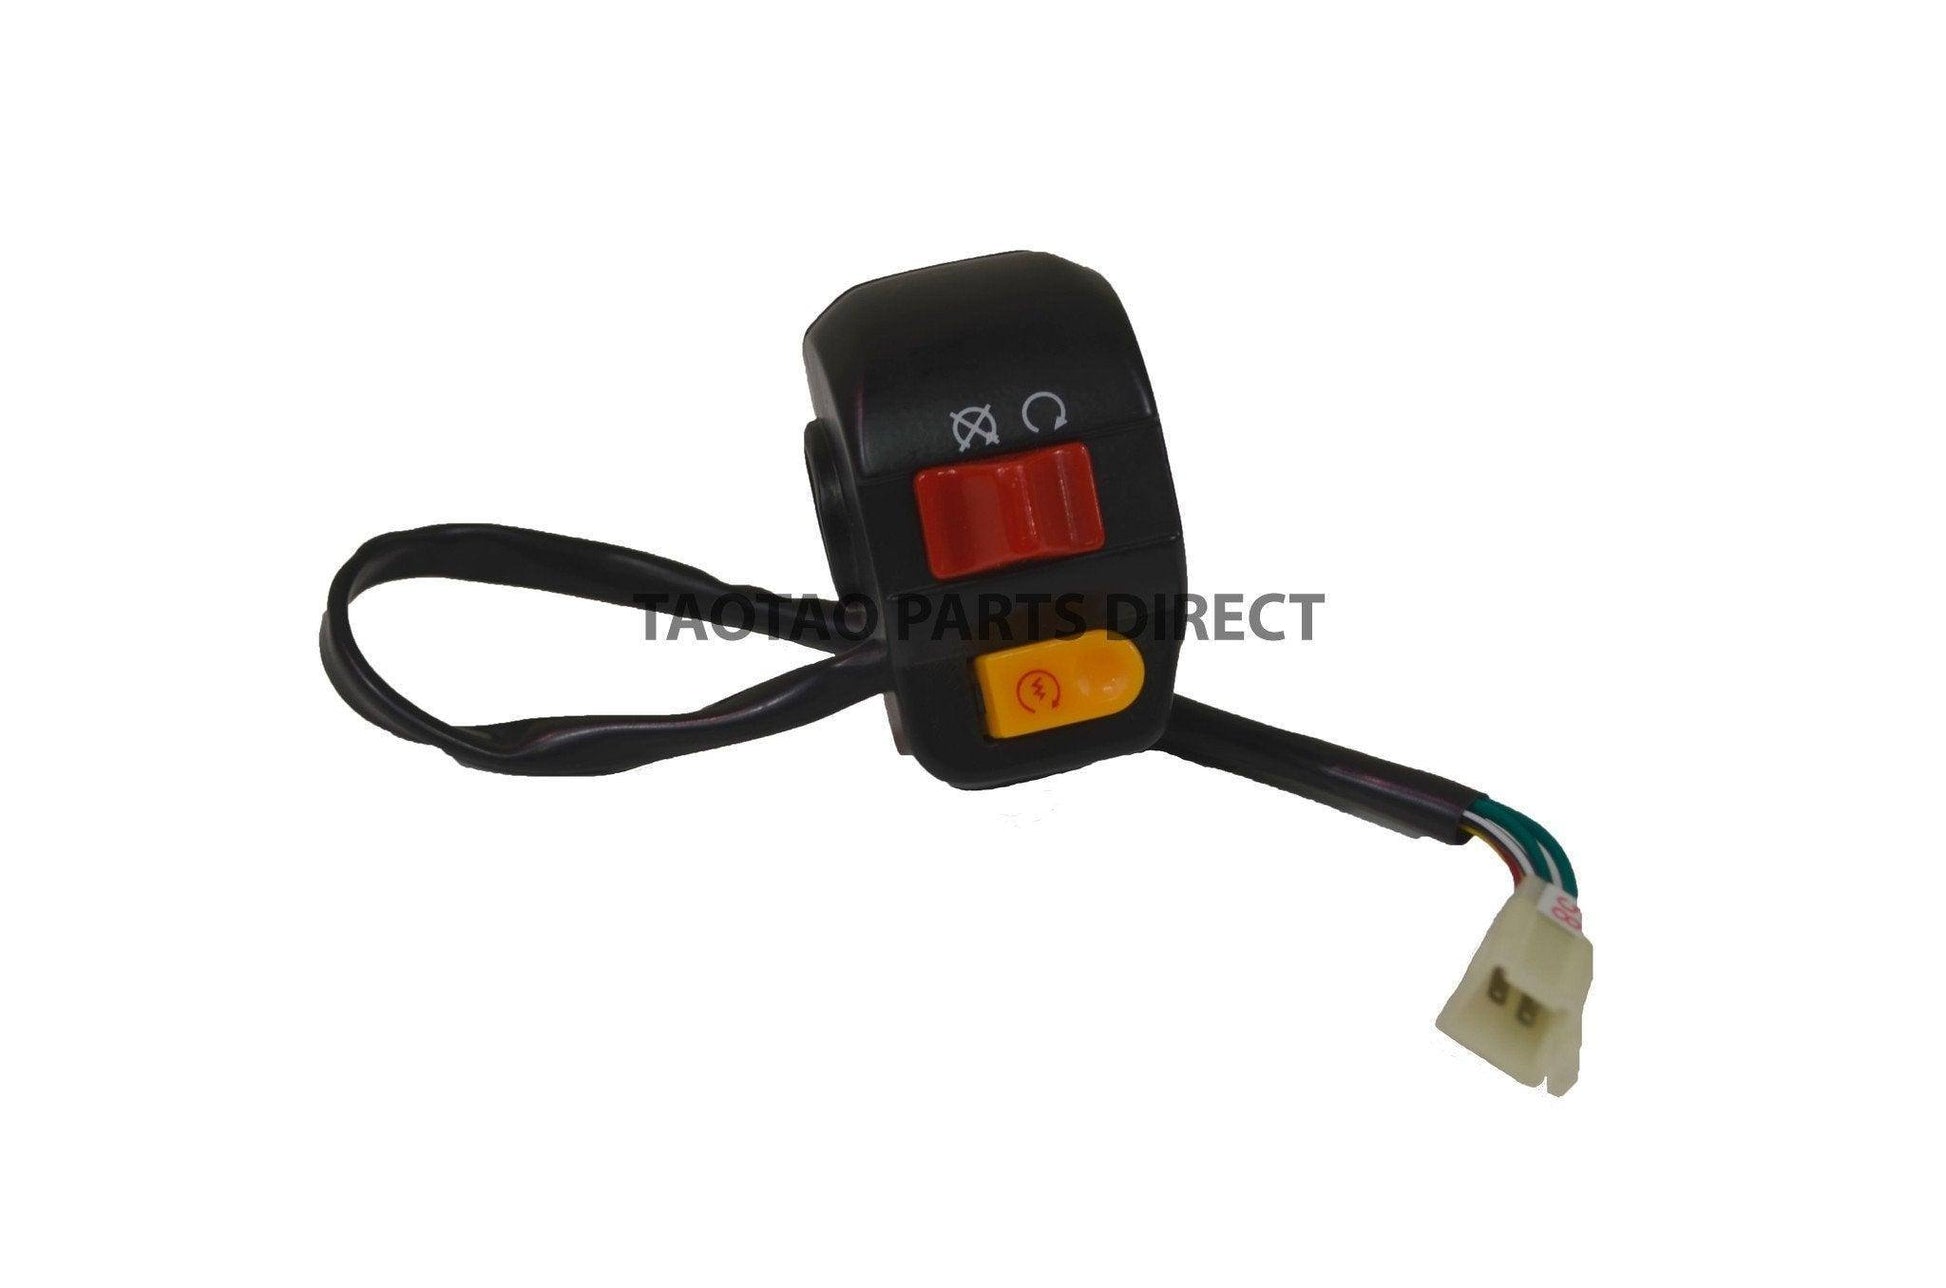 Scooter Right Multifunction Switch - TaoTao Parts Direct